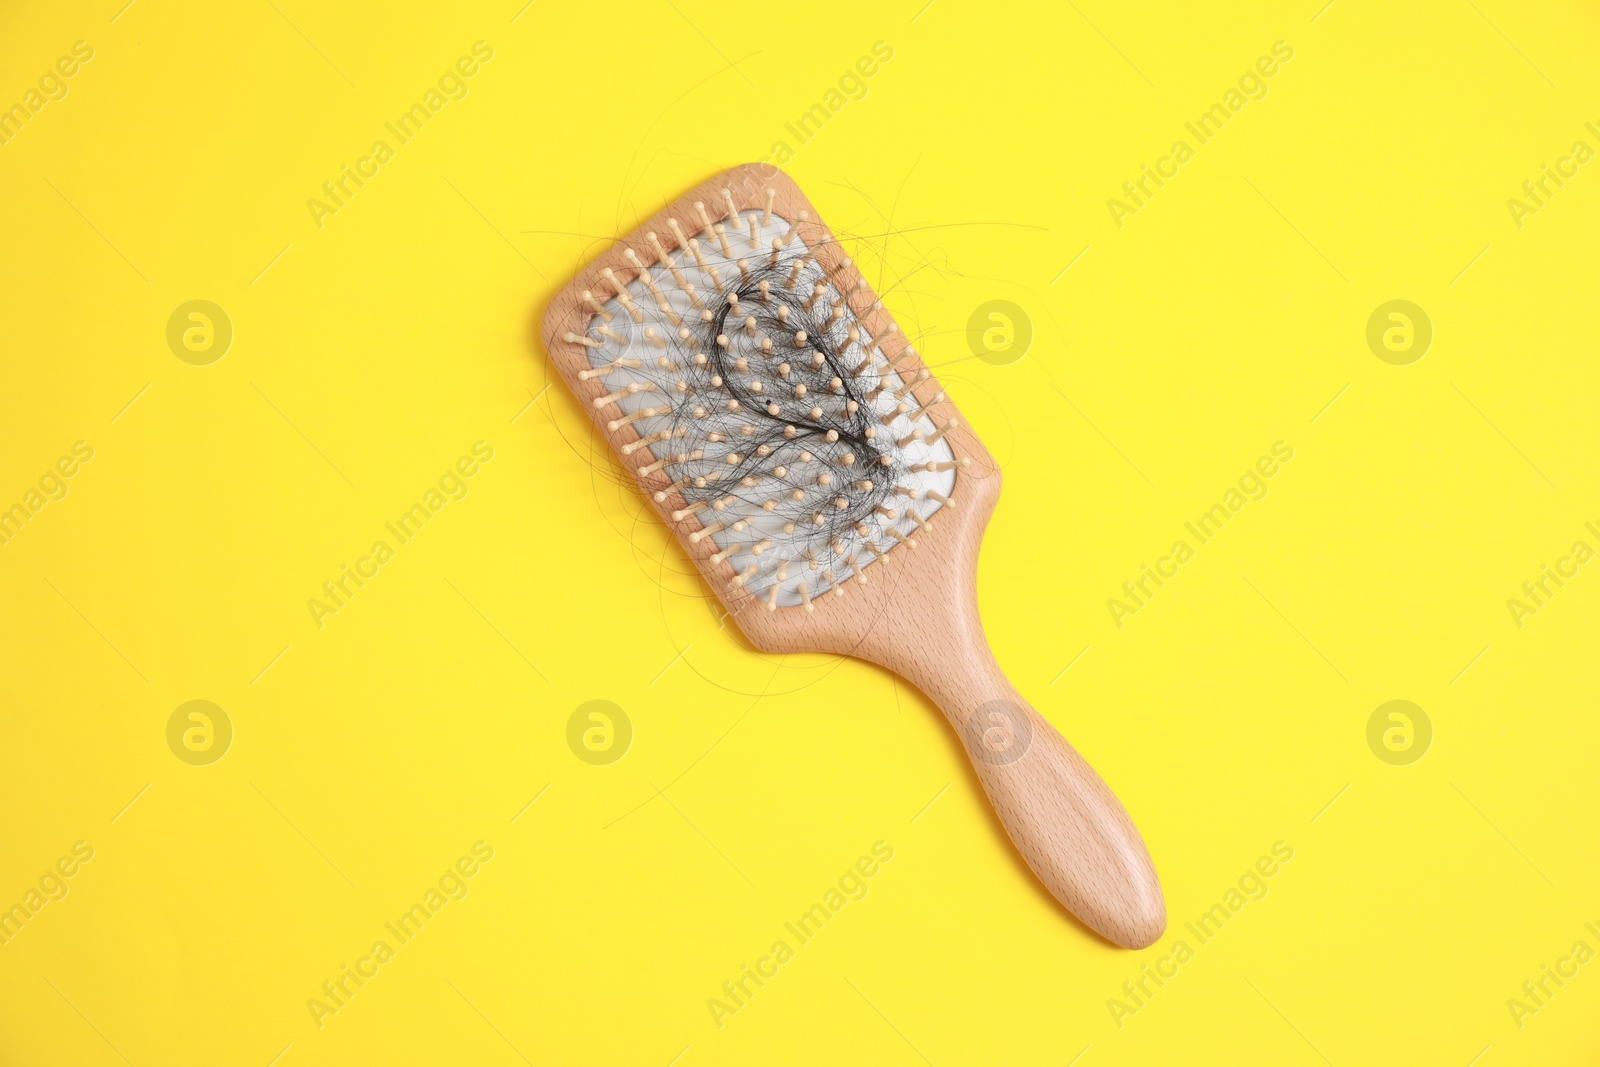 Photo of Wooden brush with lost hair on yellow background, top view